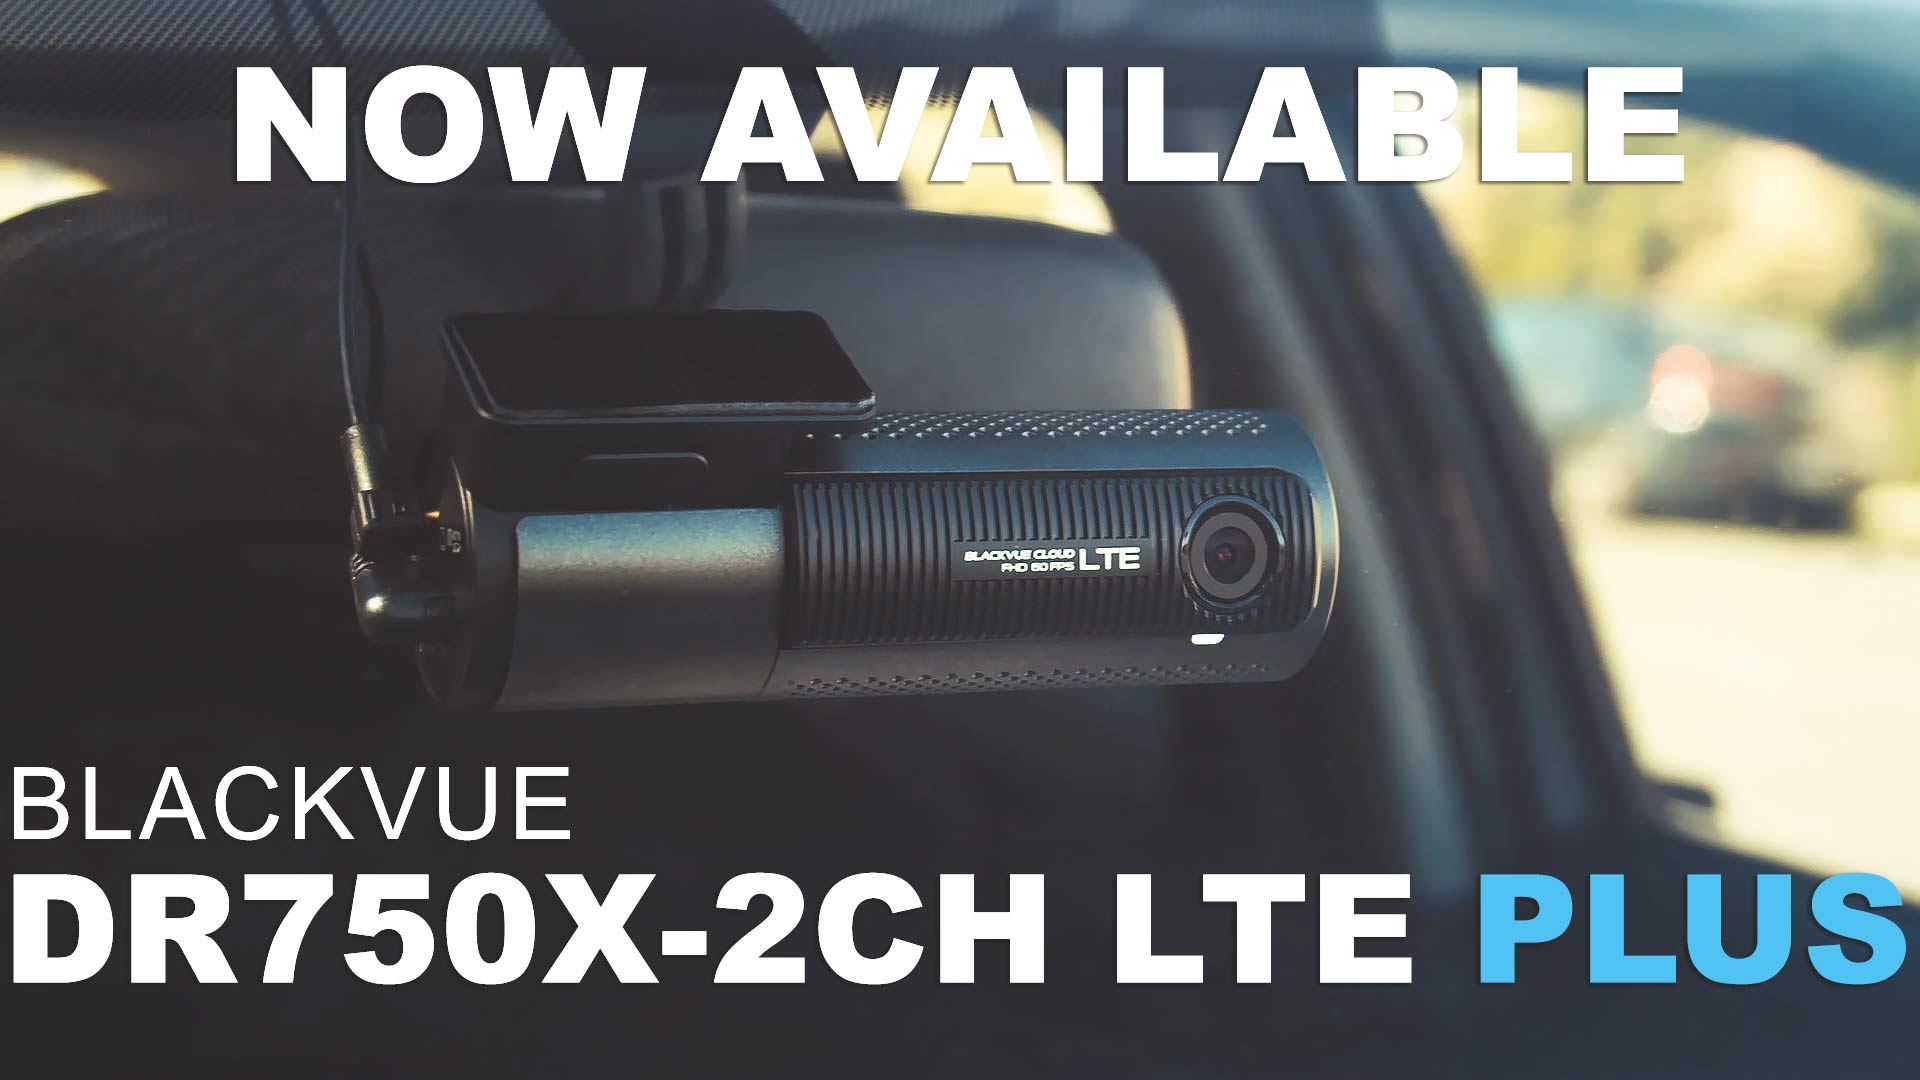 BlackVue DR750X-2CH LTE Plus Dash Cam with Built-in 4G Capability Available Now